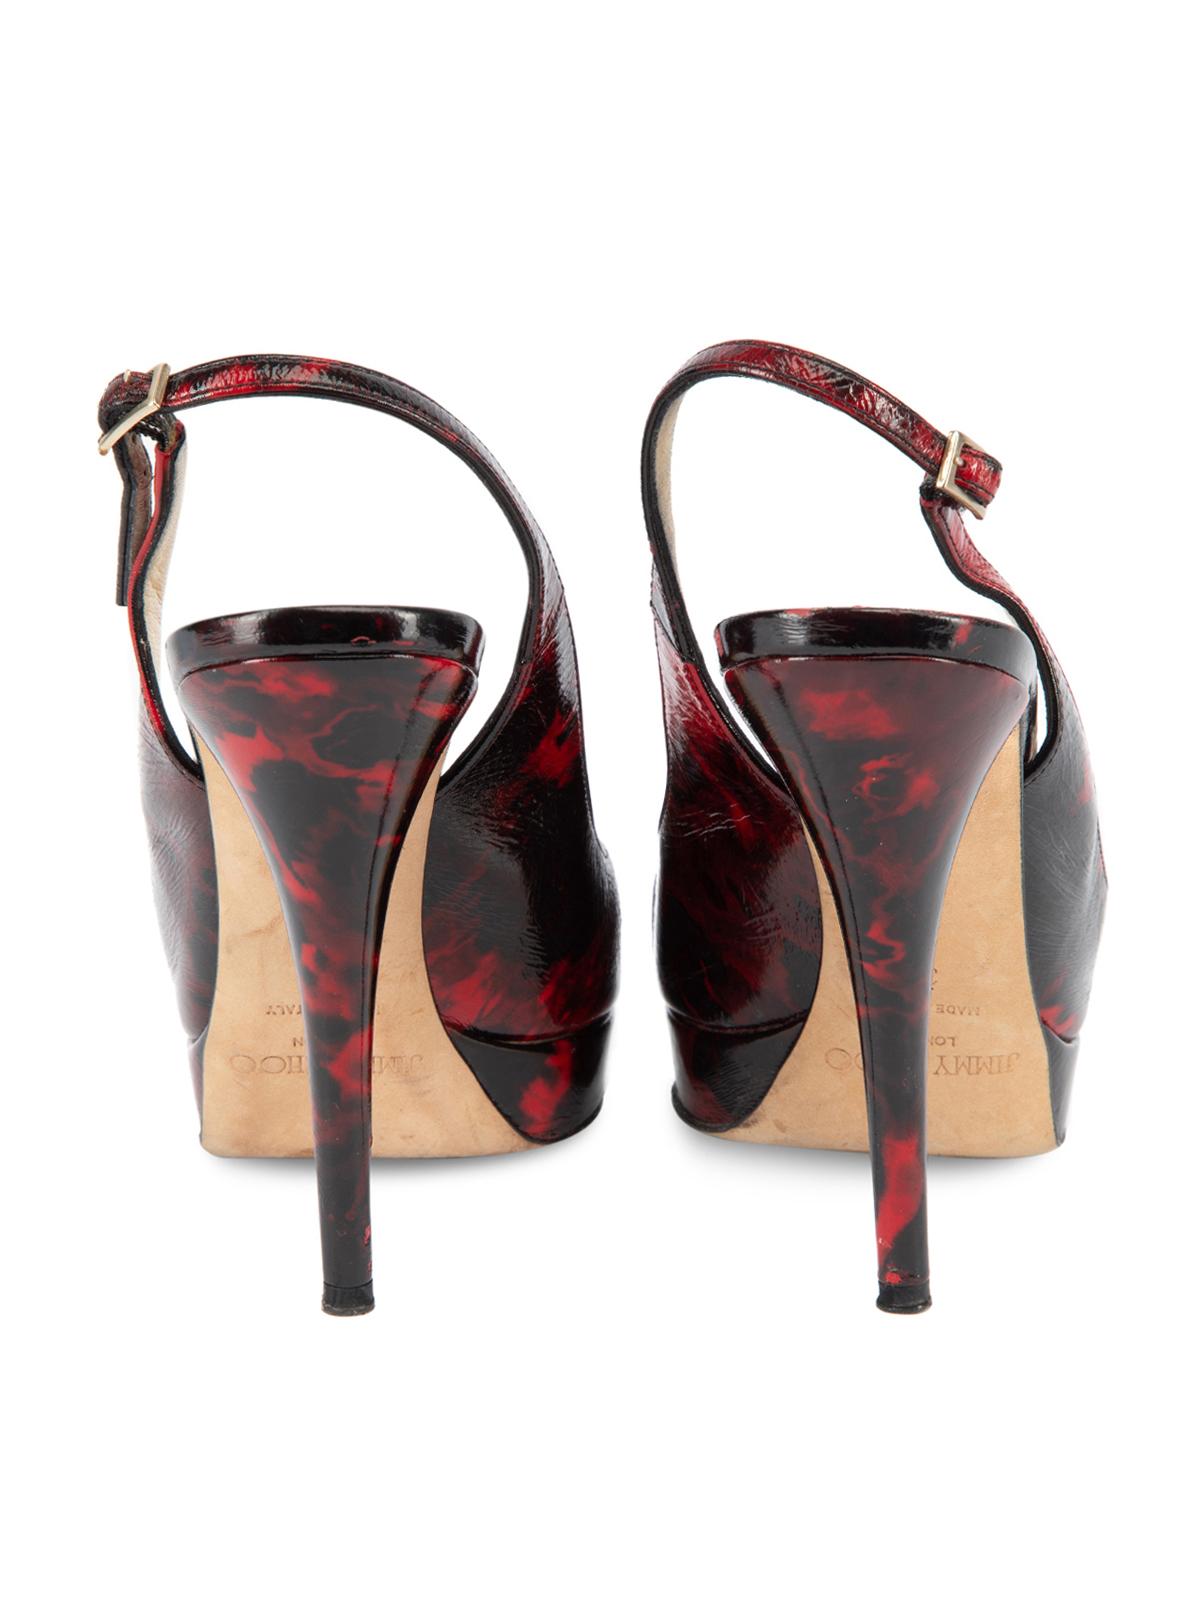 Pre-Loved Jimmy Choo Women's Red & Black Patterned Crown Slingback Peep Toe In Excellent Condition In London, GB